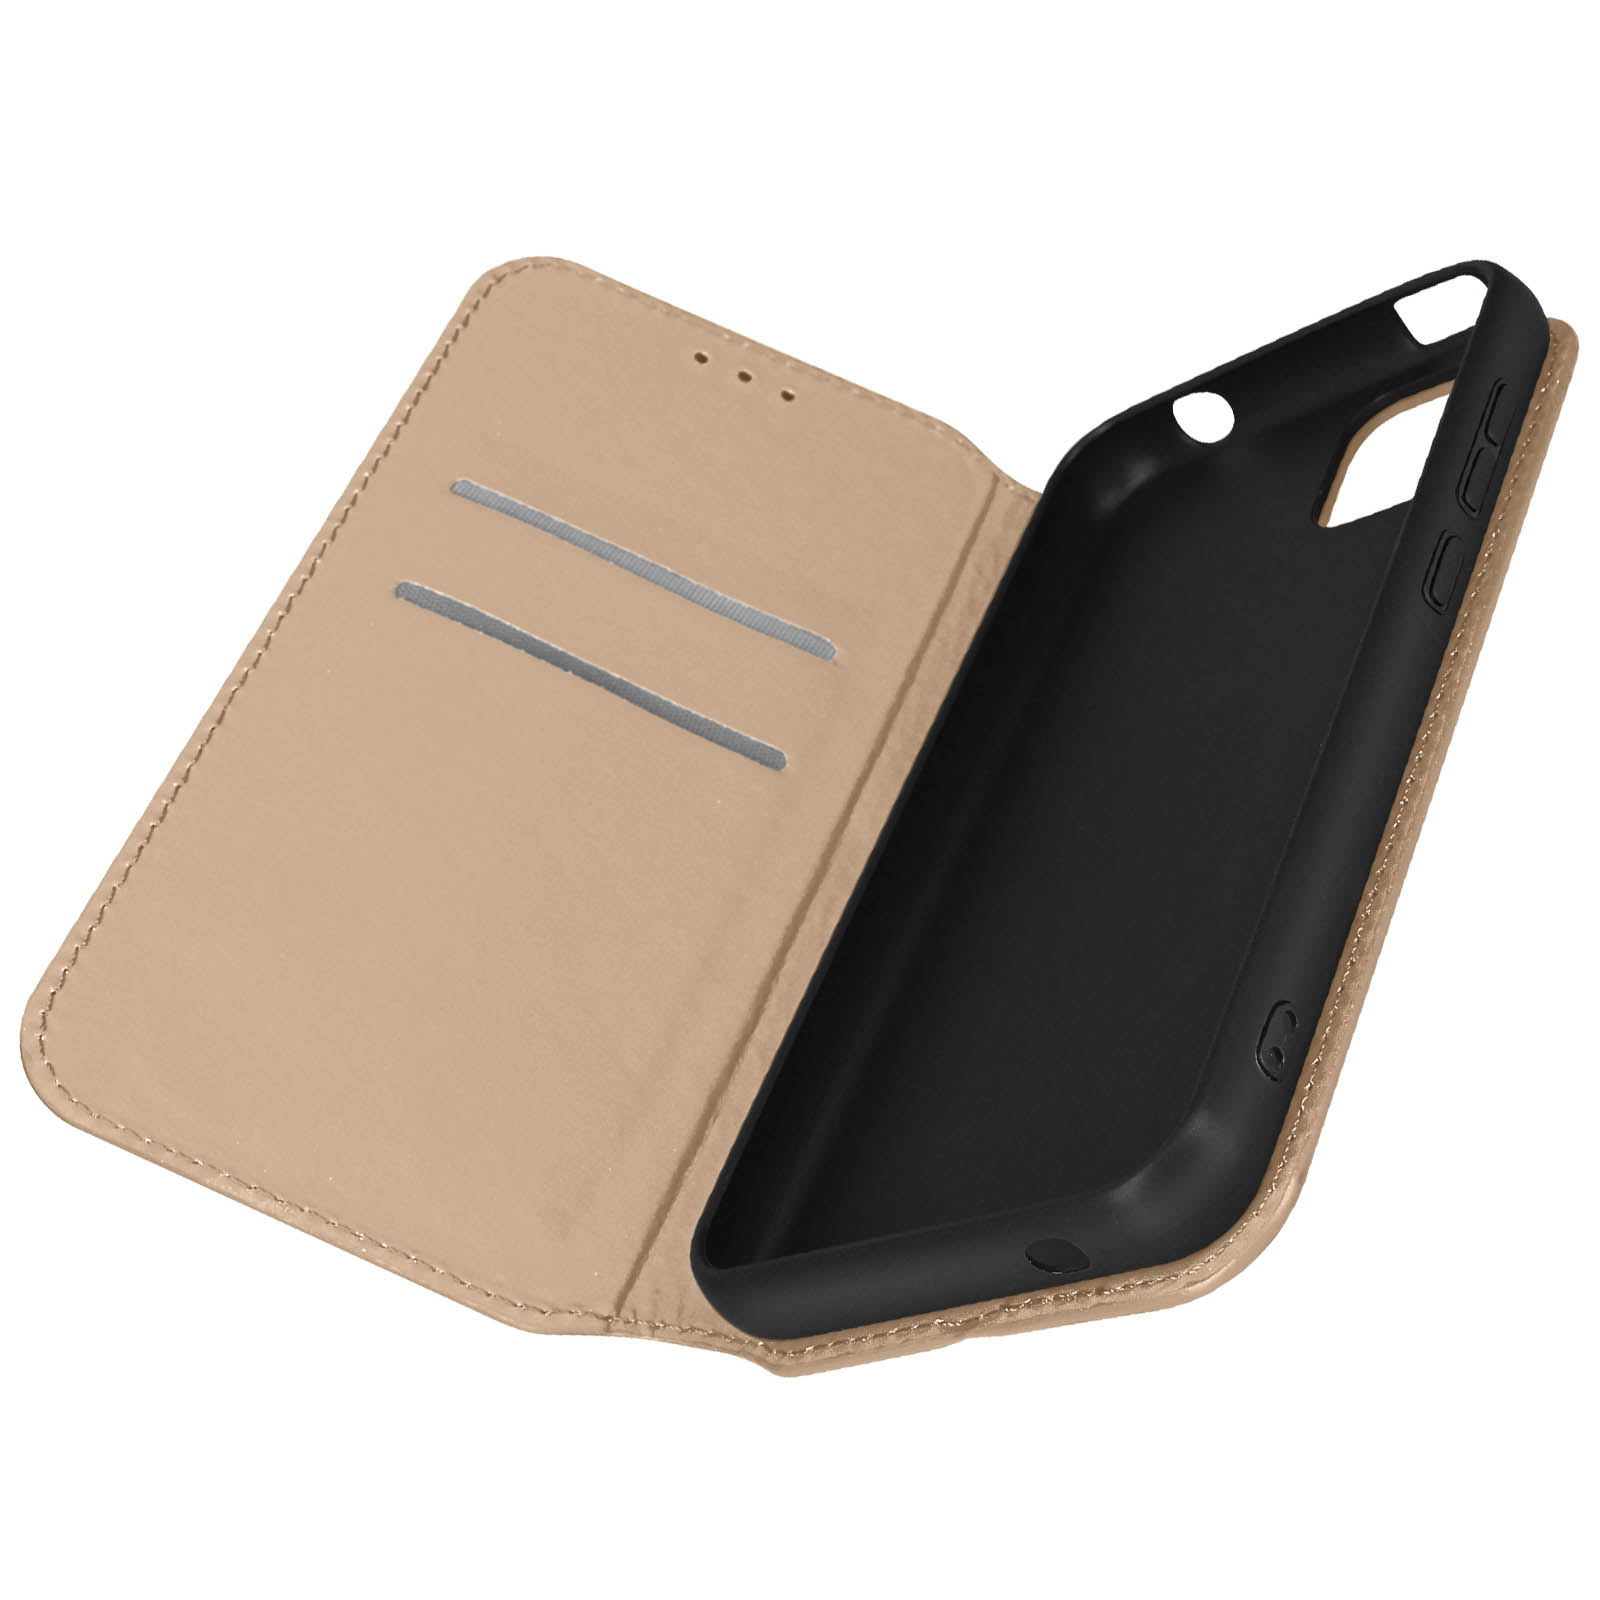 AVIZAR Classic Edition, Y52, Bookcover, Wiko Gold Wiko, mit Backcover Series, Magnetklappe